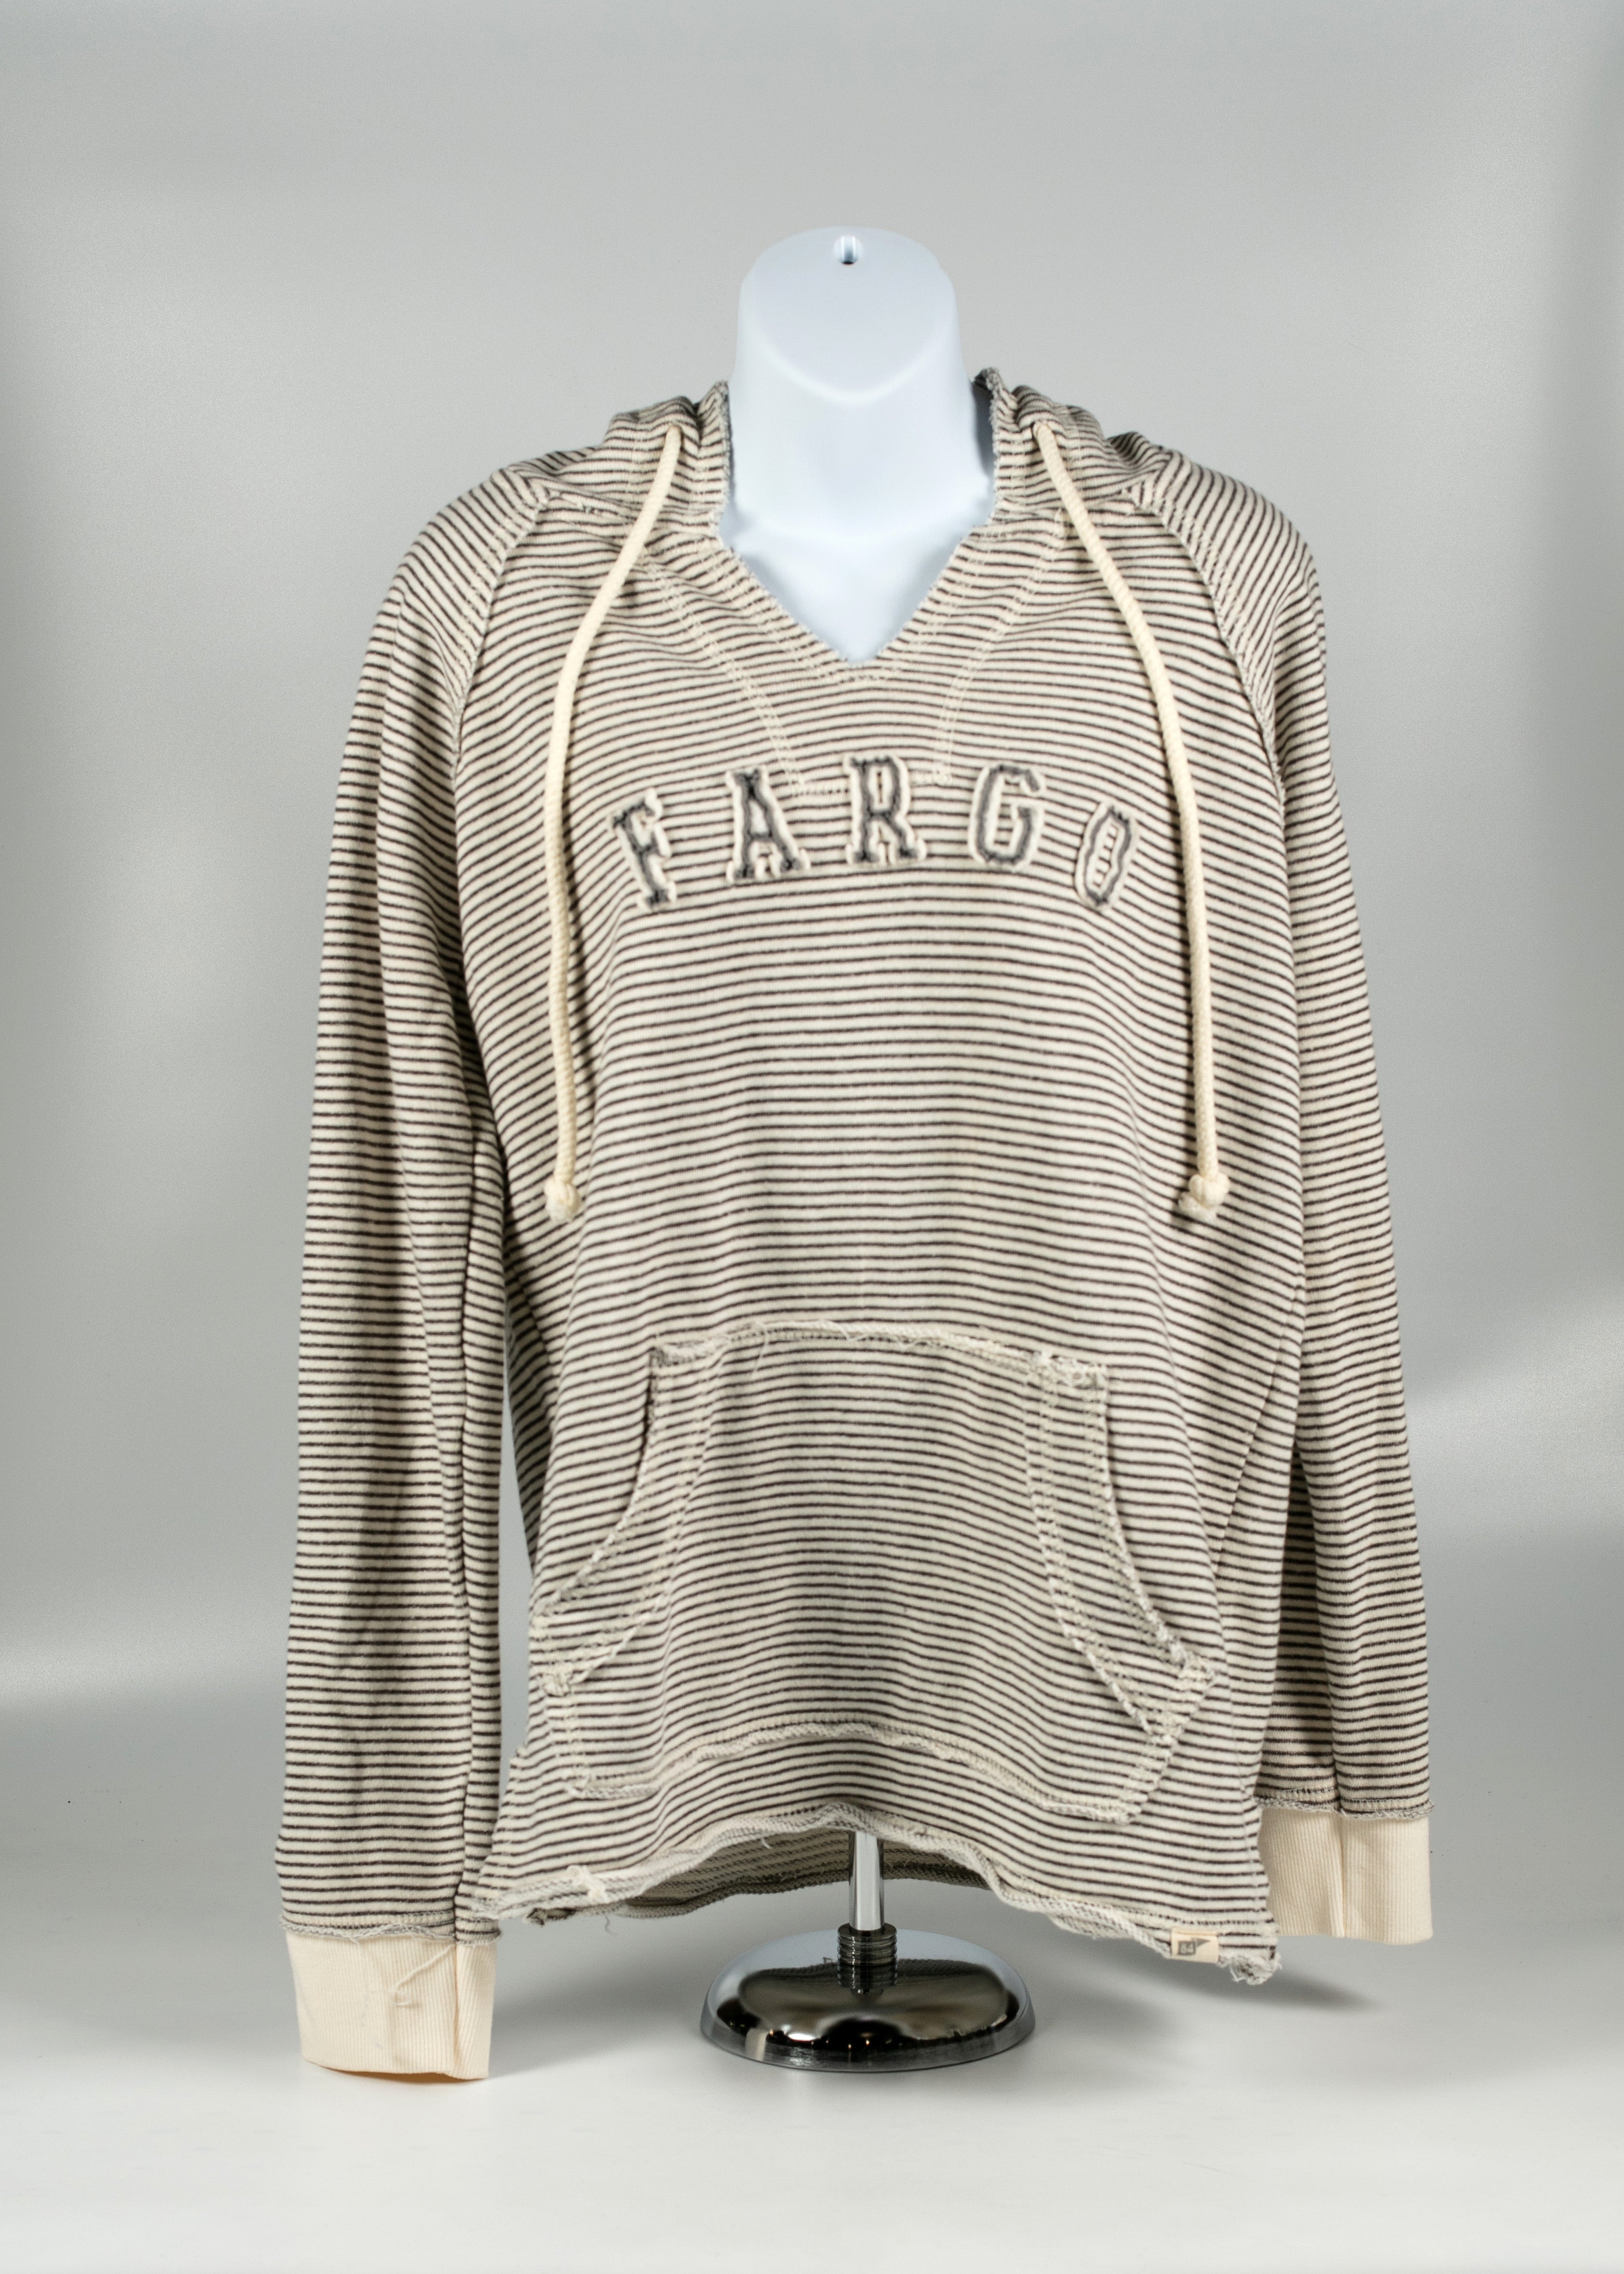 FARGO WOMEN'S FLOCKED LETTER ADULT FRENCH TERRY HOODIE BONE/OATMEAL COLOR 60/40 COTTON POLY BLEND